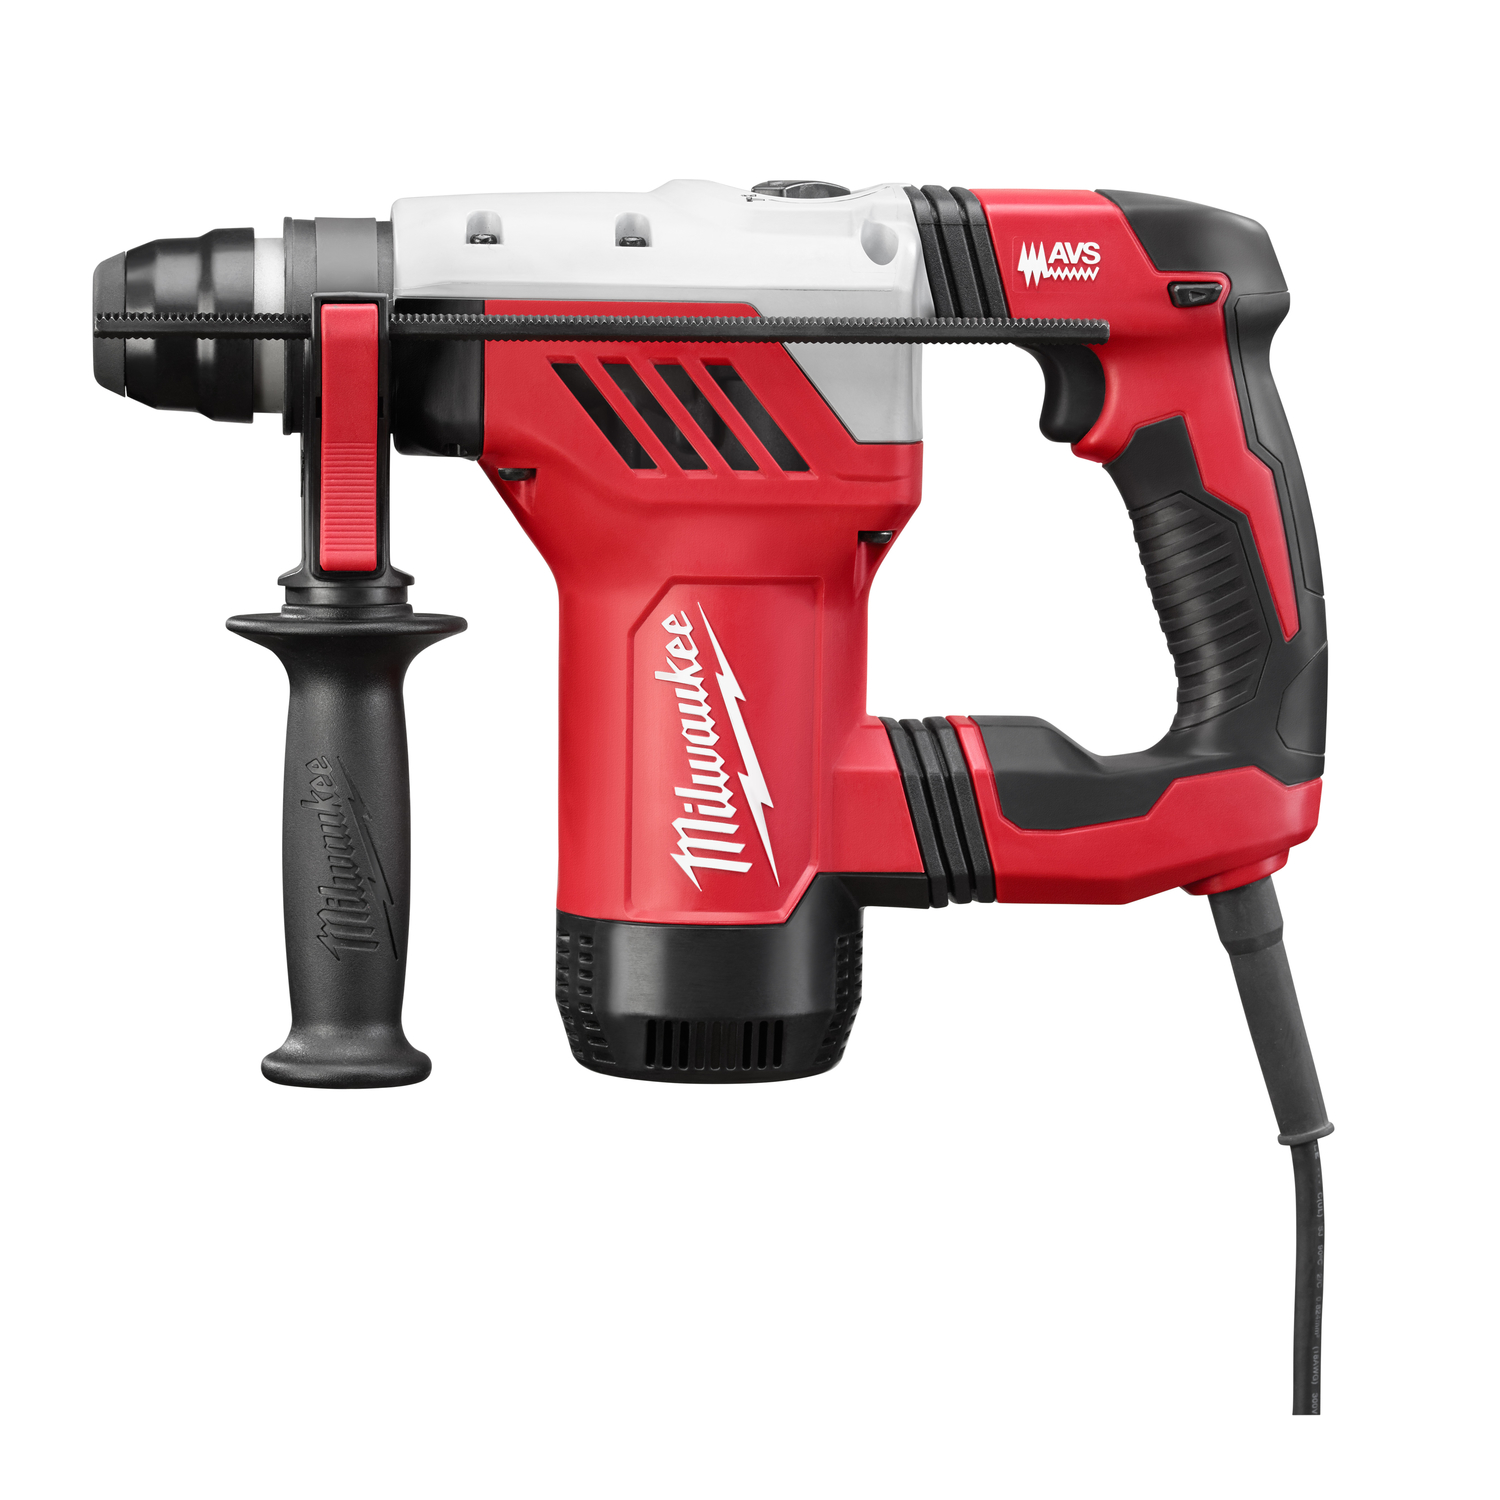 Photos - Drill / Screwdriver Milwaukee 8 amps 1-1/8 in. Corded SDS-Plus Rotary Hammer Drill 5268-21 